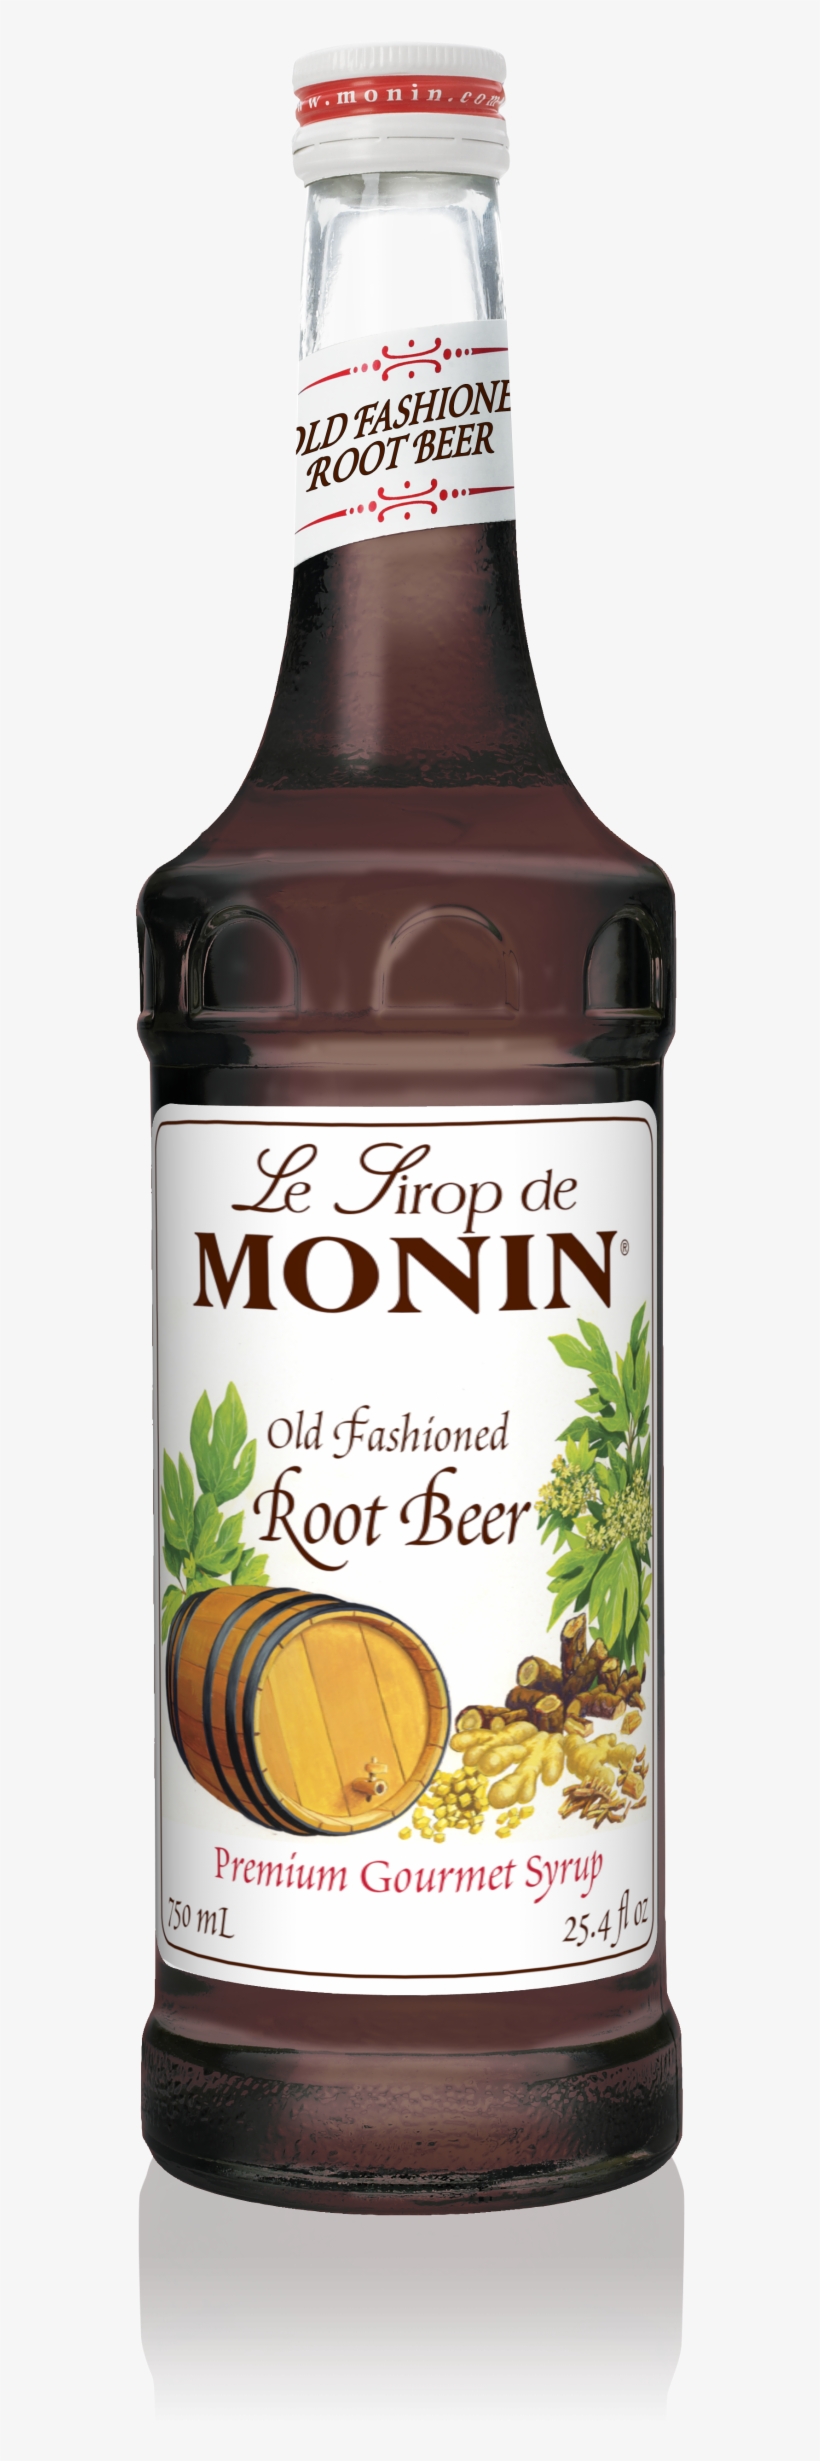 Old Fashioned Root Beer Syrup - Monin Chocolate Syrup, transparent png #779598